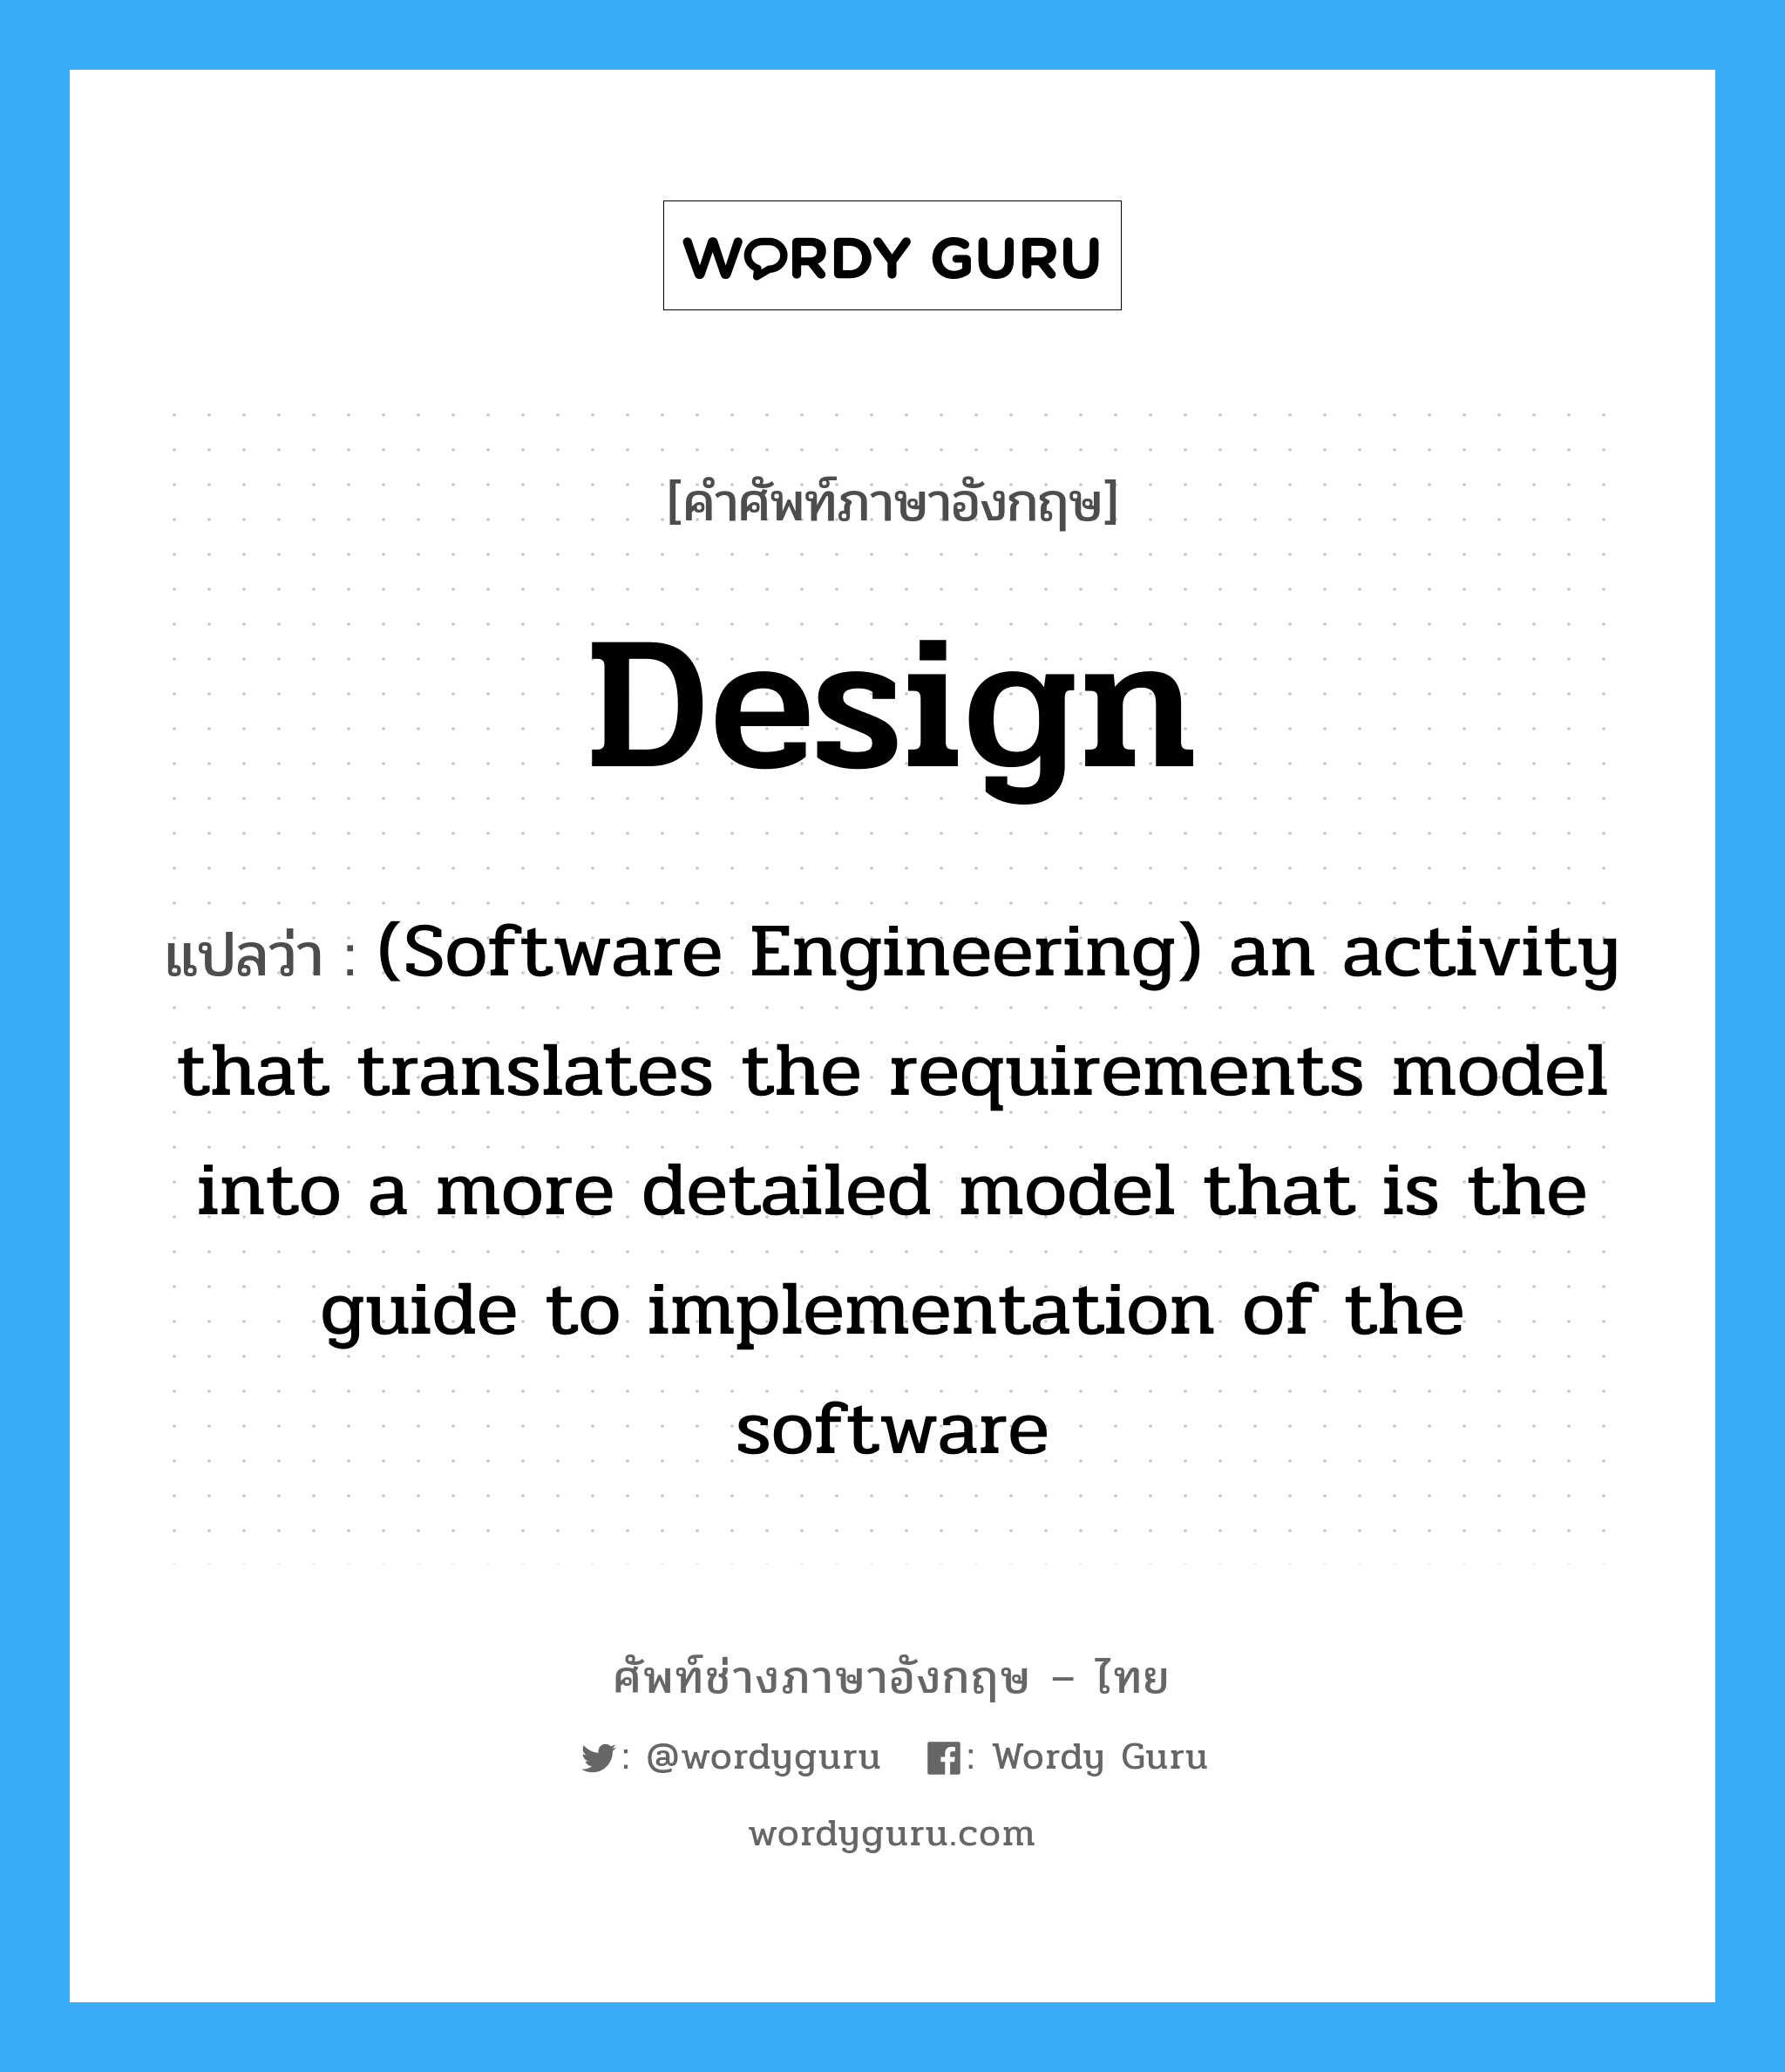 Design แปลว่า?, คำศัพท์ช่างภาษาอังกฤษ - ไทย Design คำศัพท์ภาษาอังกฤษ Design แปลว่า (Software Engineering) an activity that translates the requirements model into a more detailed model that is the guide to implementation of the software